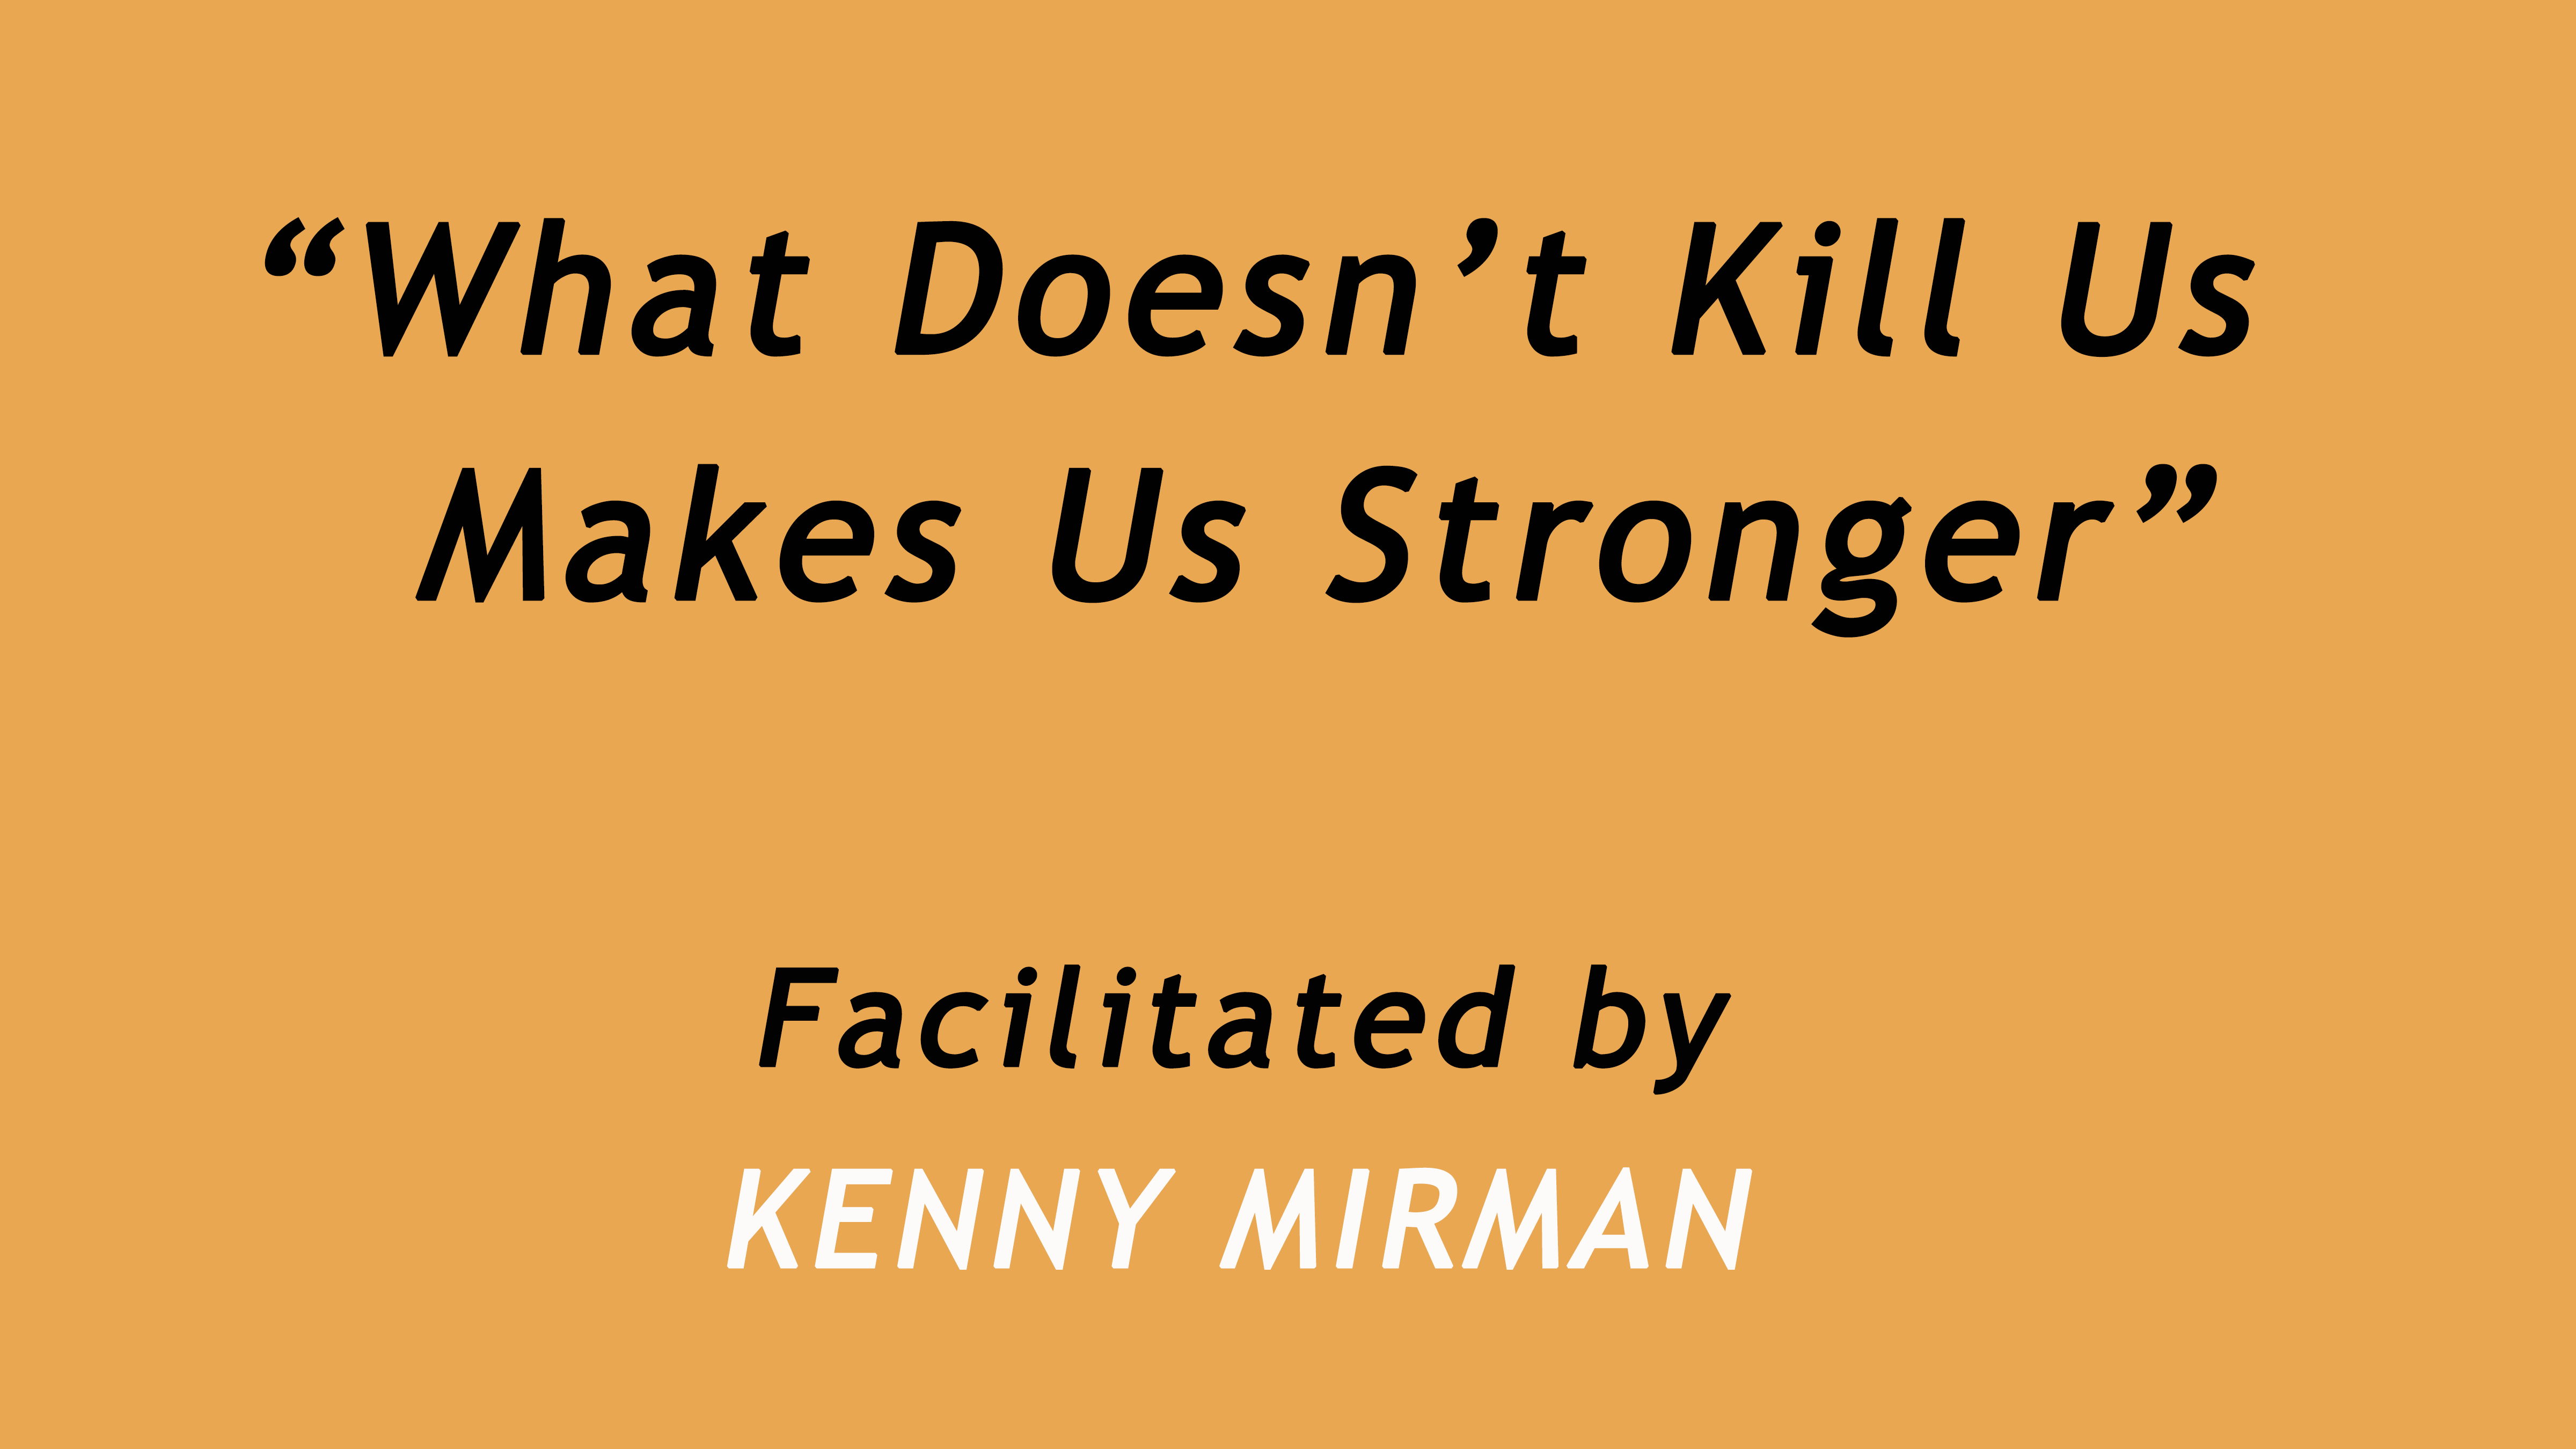 What Doesn't Kill Us Makes Us Stronger. Facilitated by Kenny Mirman